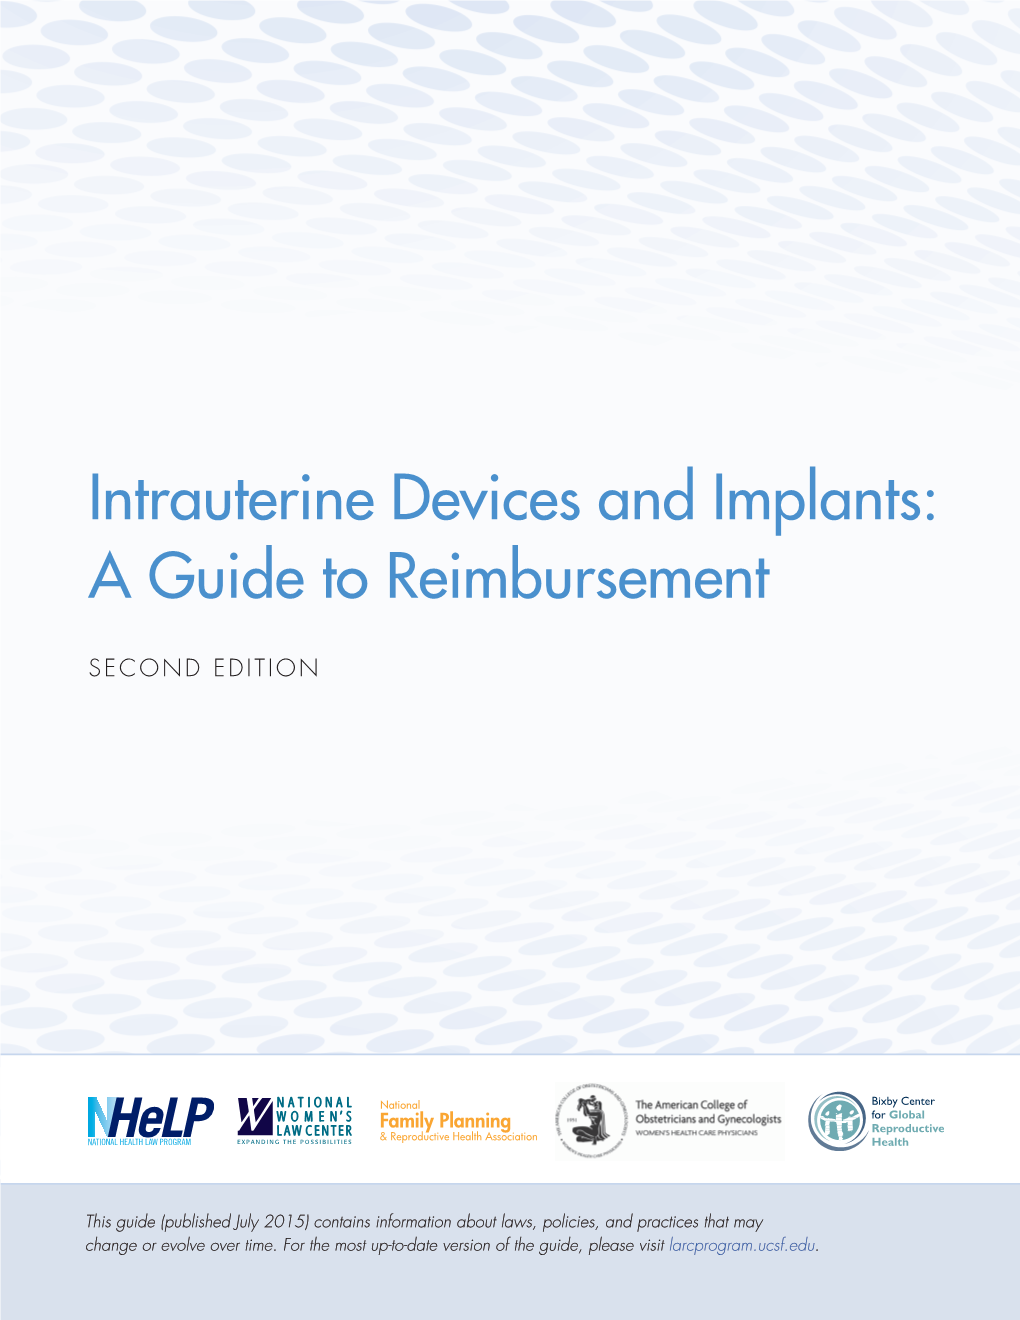 Intrauterine Devices and Implants: a Guide to Reimbursement